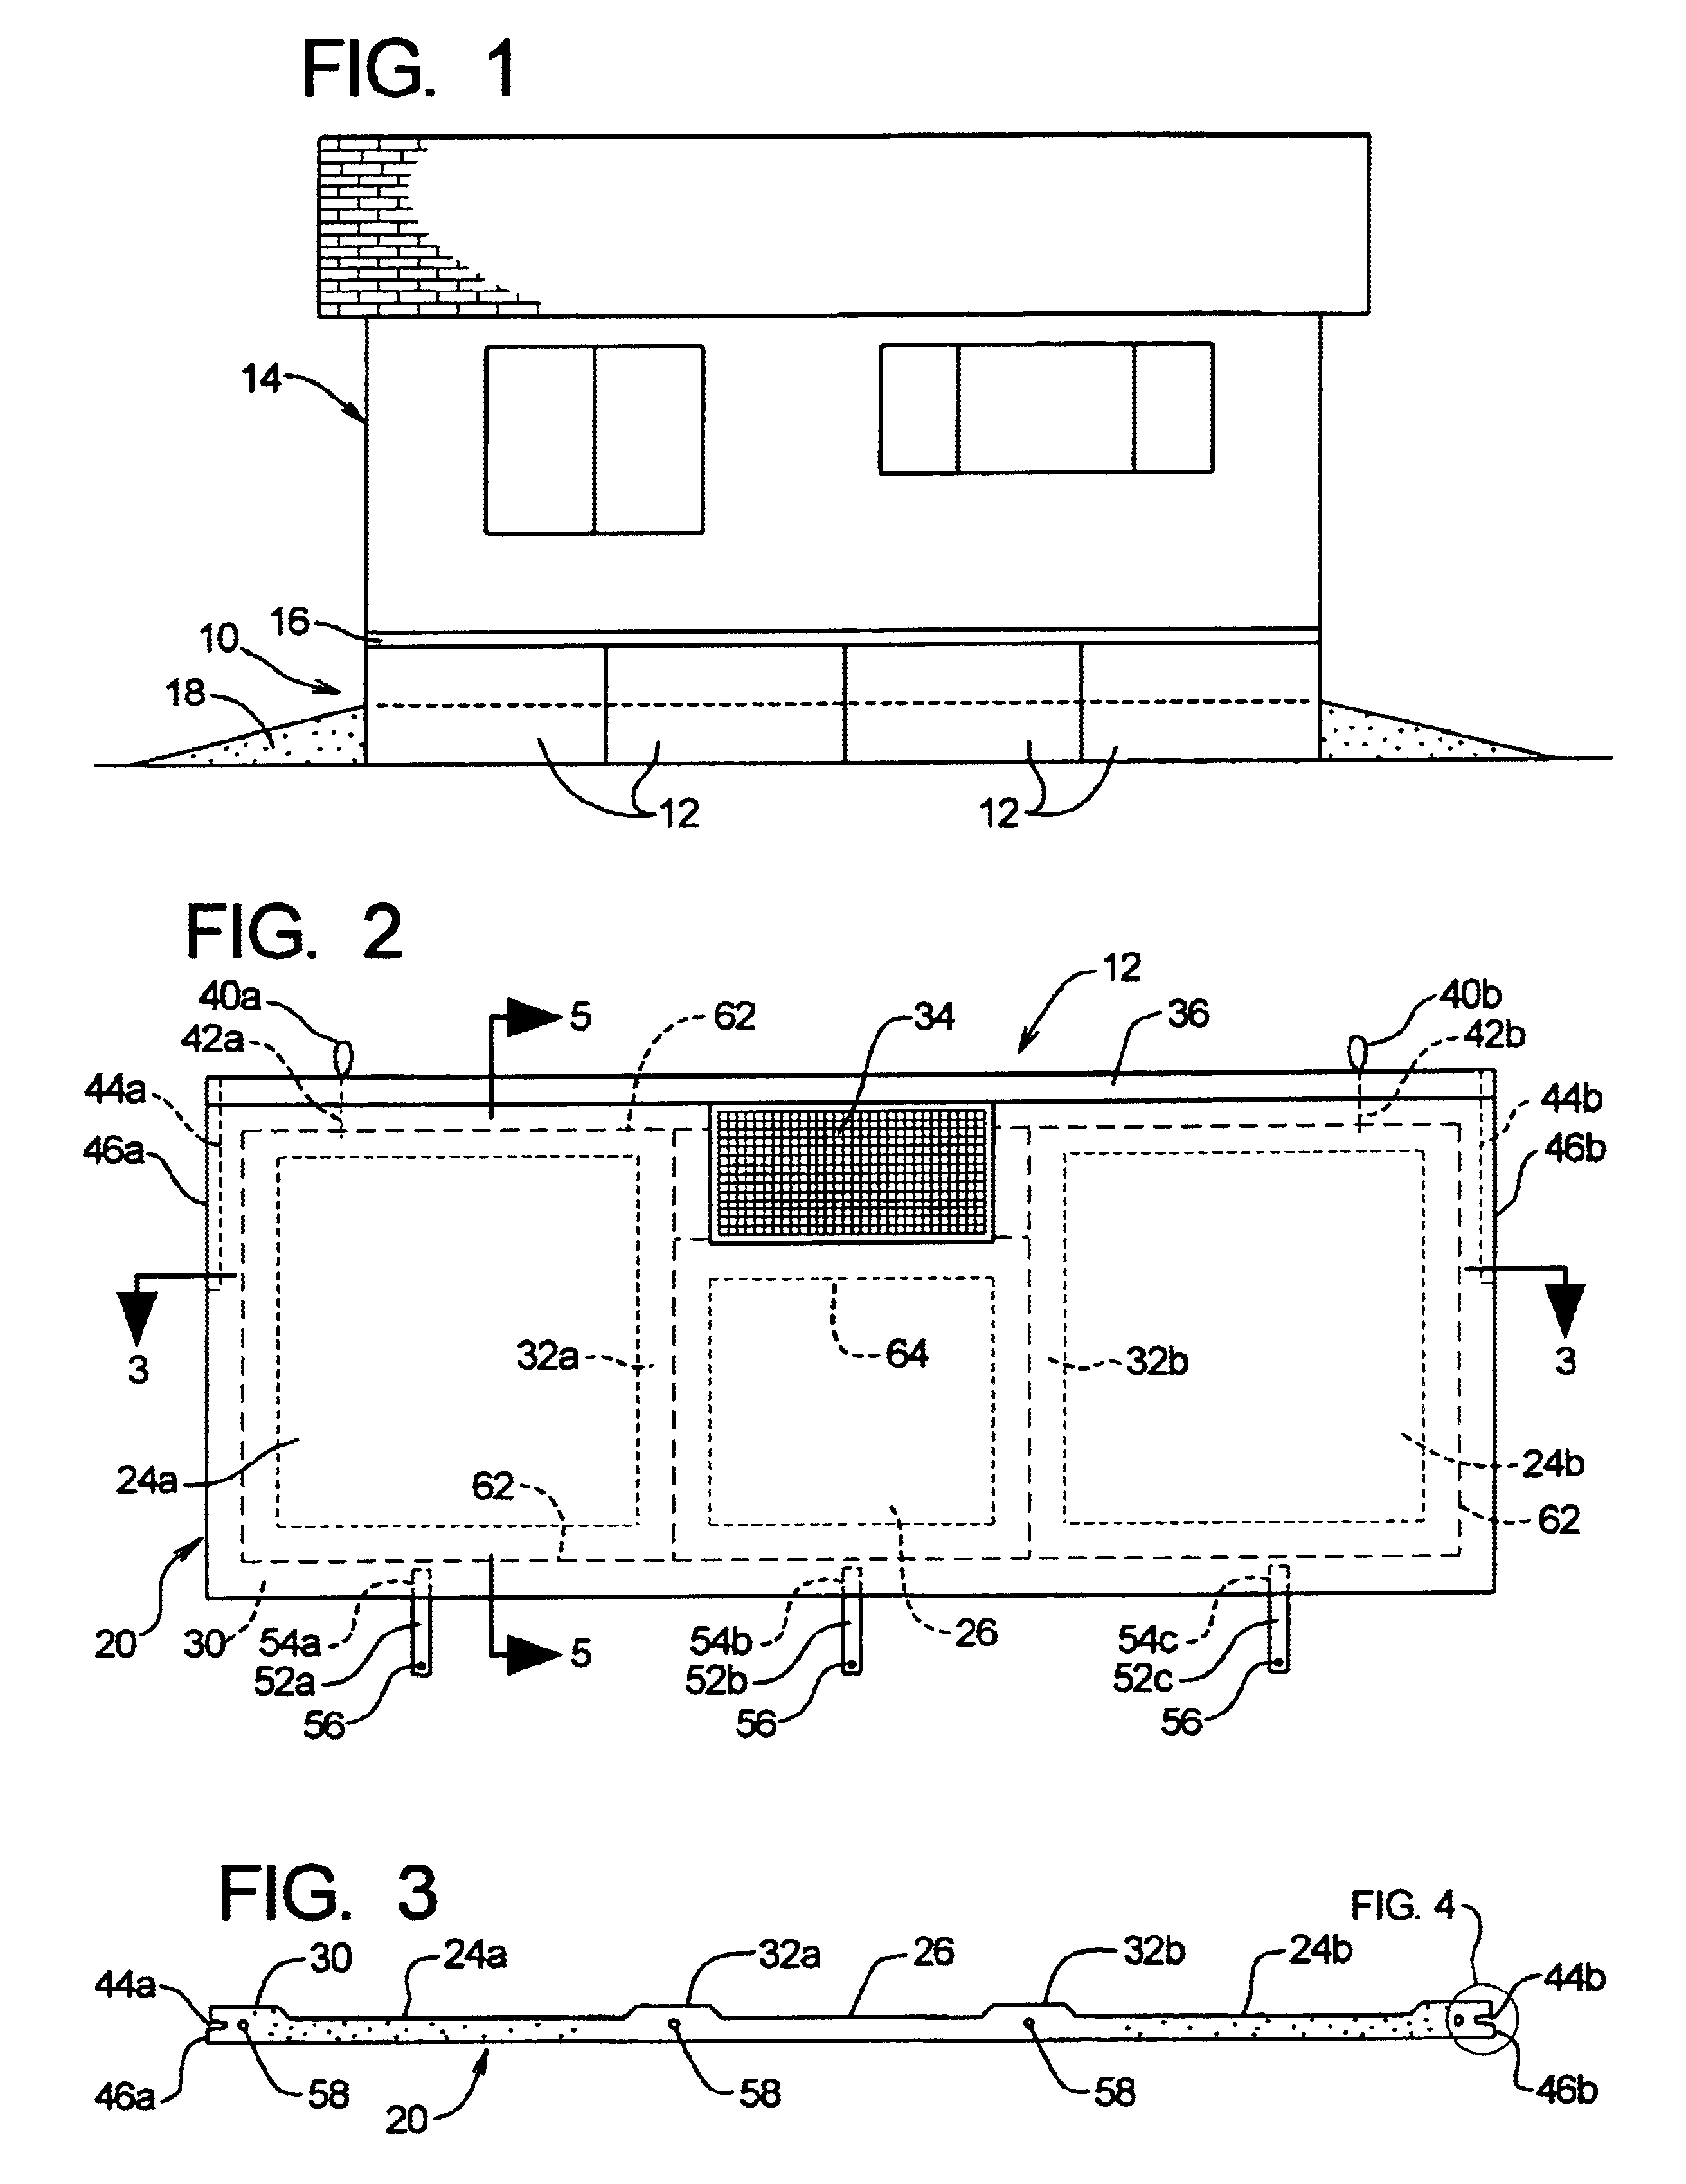 Concrete panel skirting system for manufactured homes and method for making the same